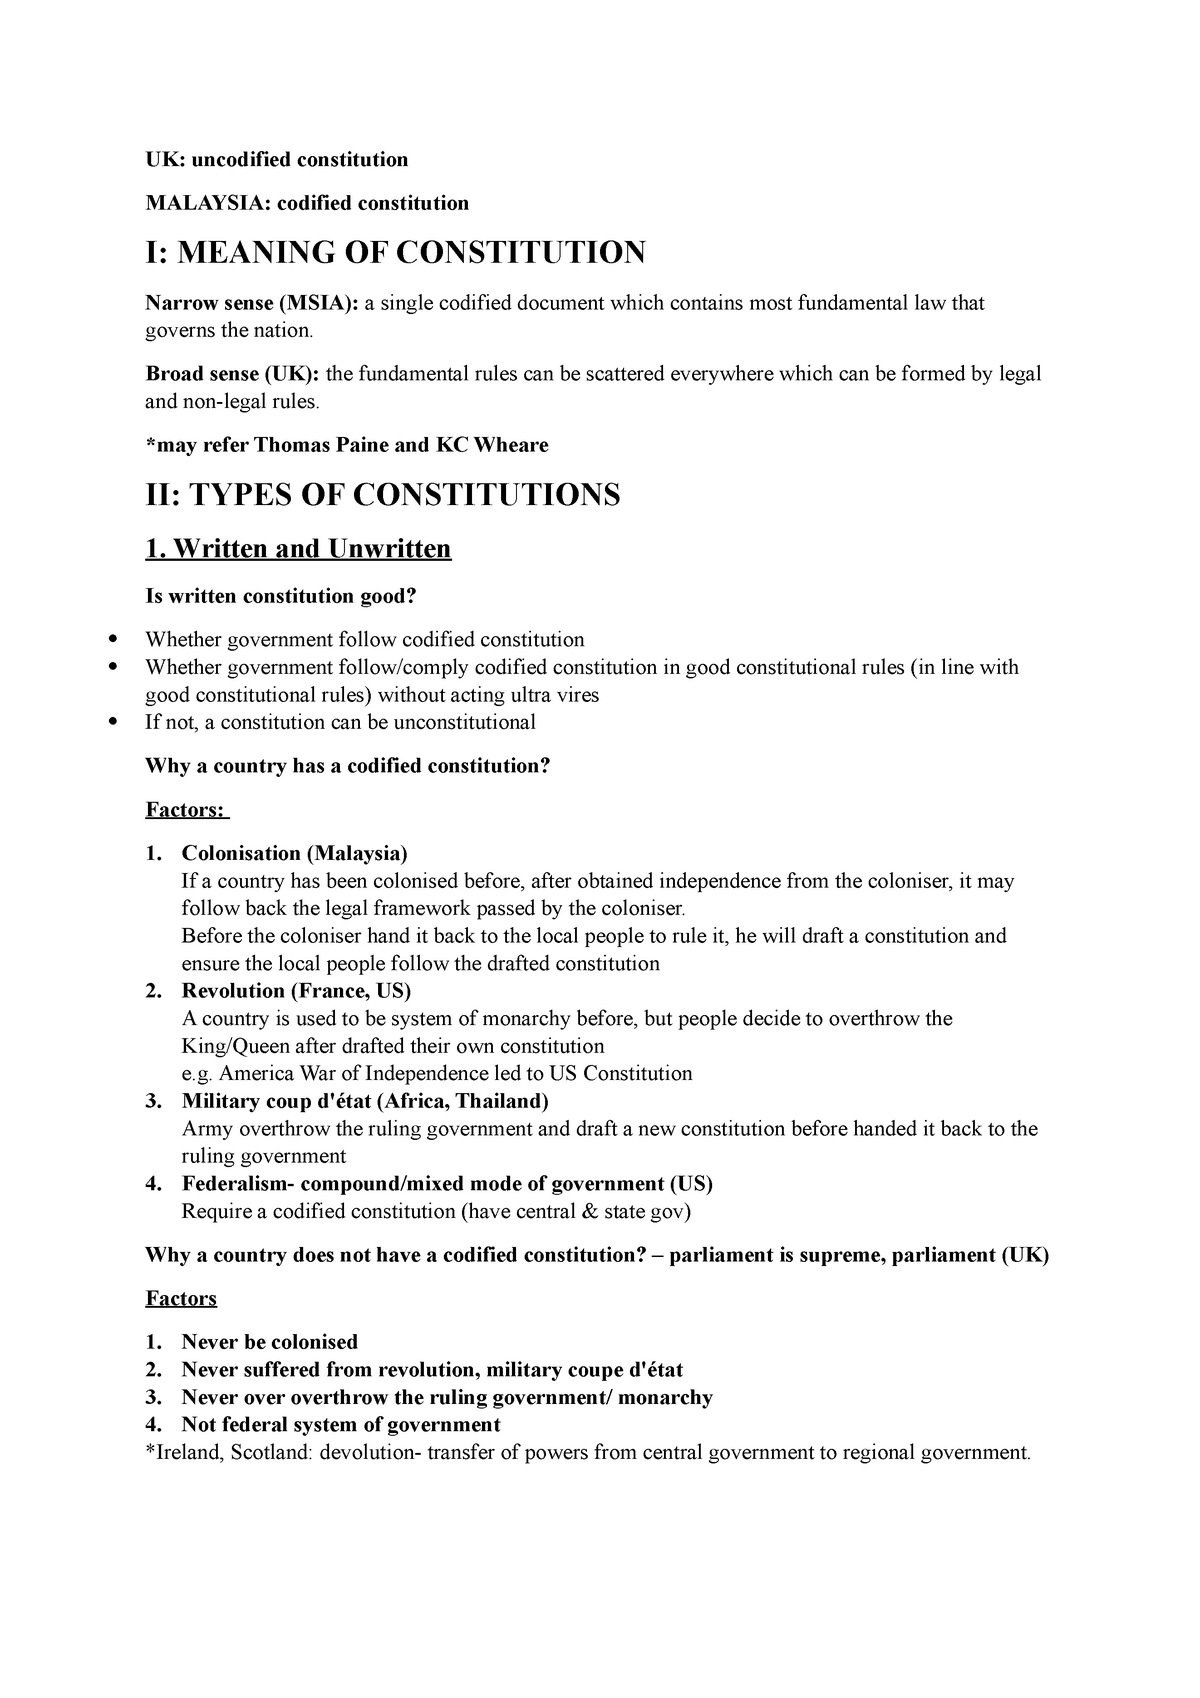 does the uk need a codified constitution essay